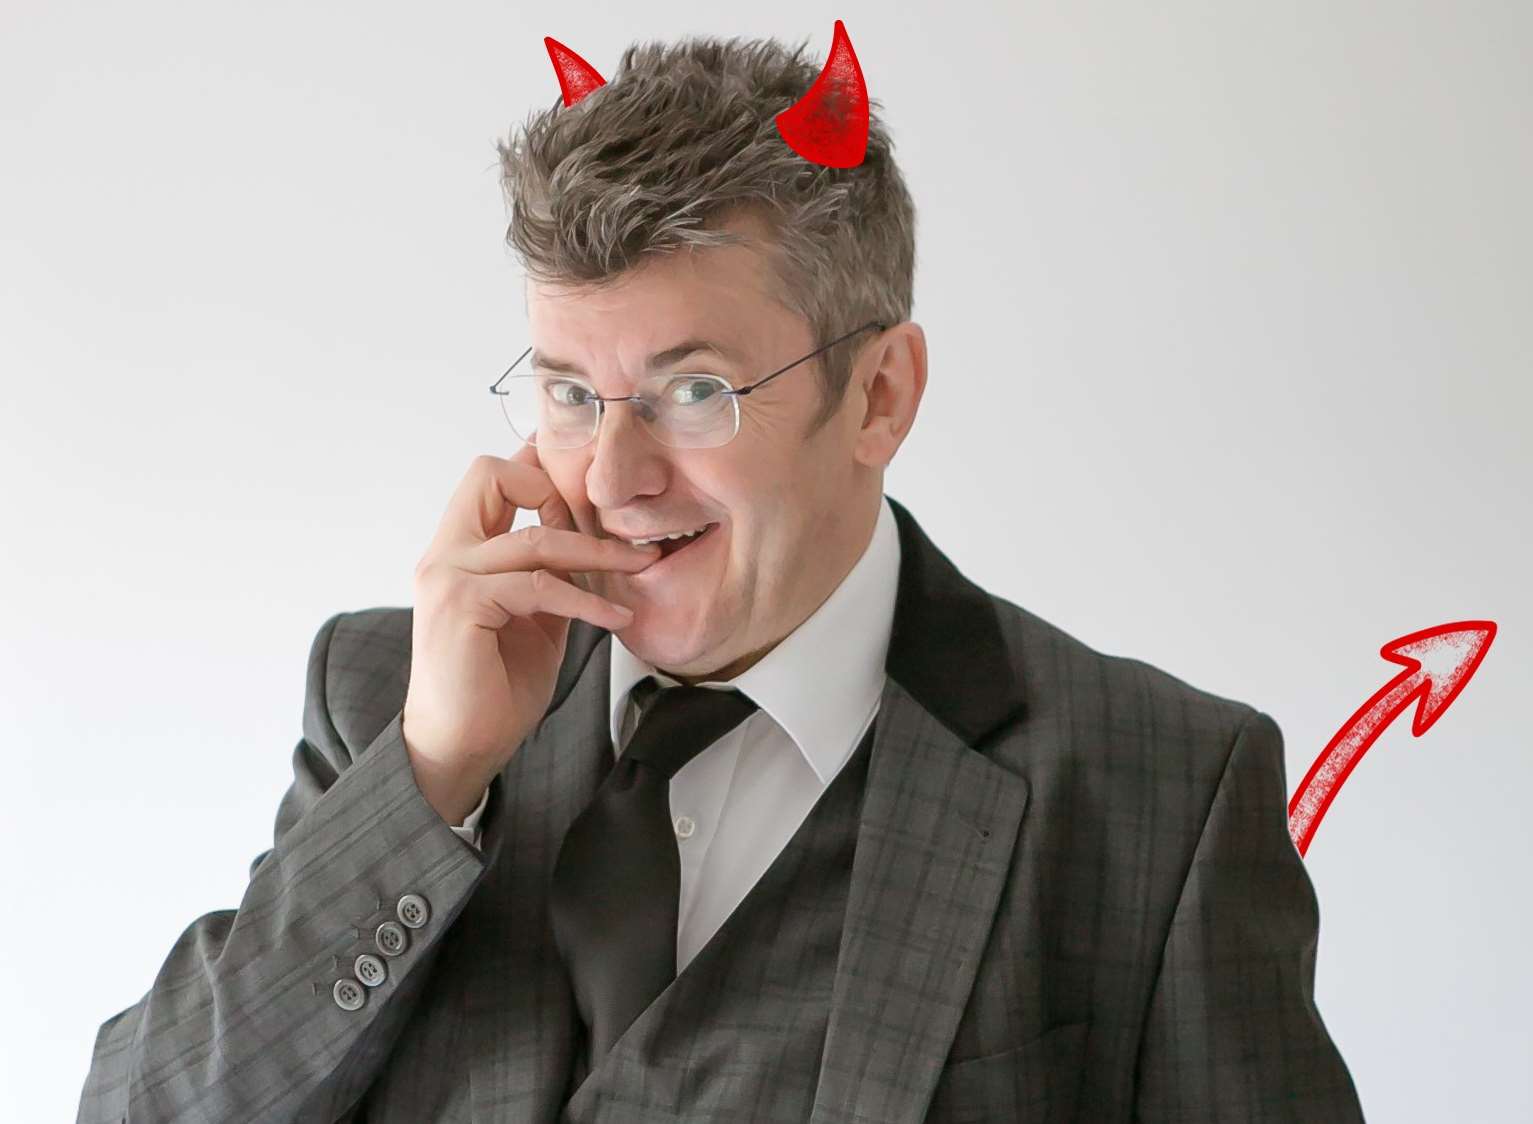 Joe Pasquale has two Kent dates this month